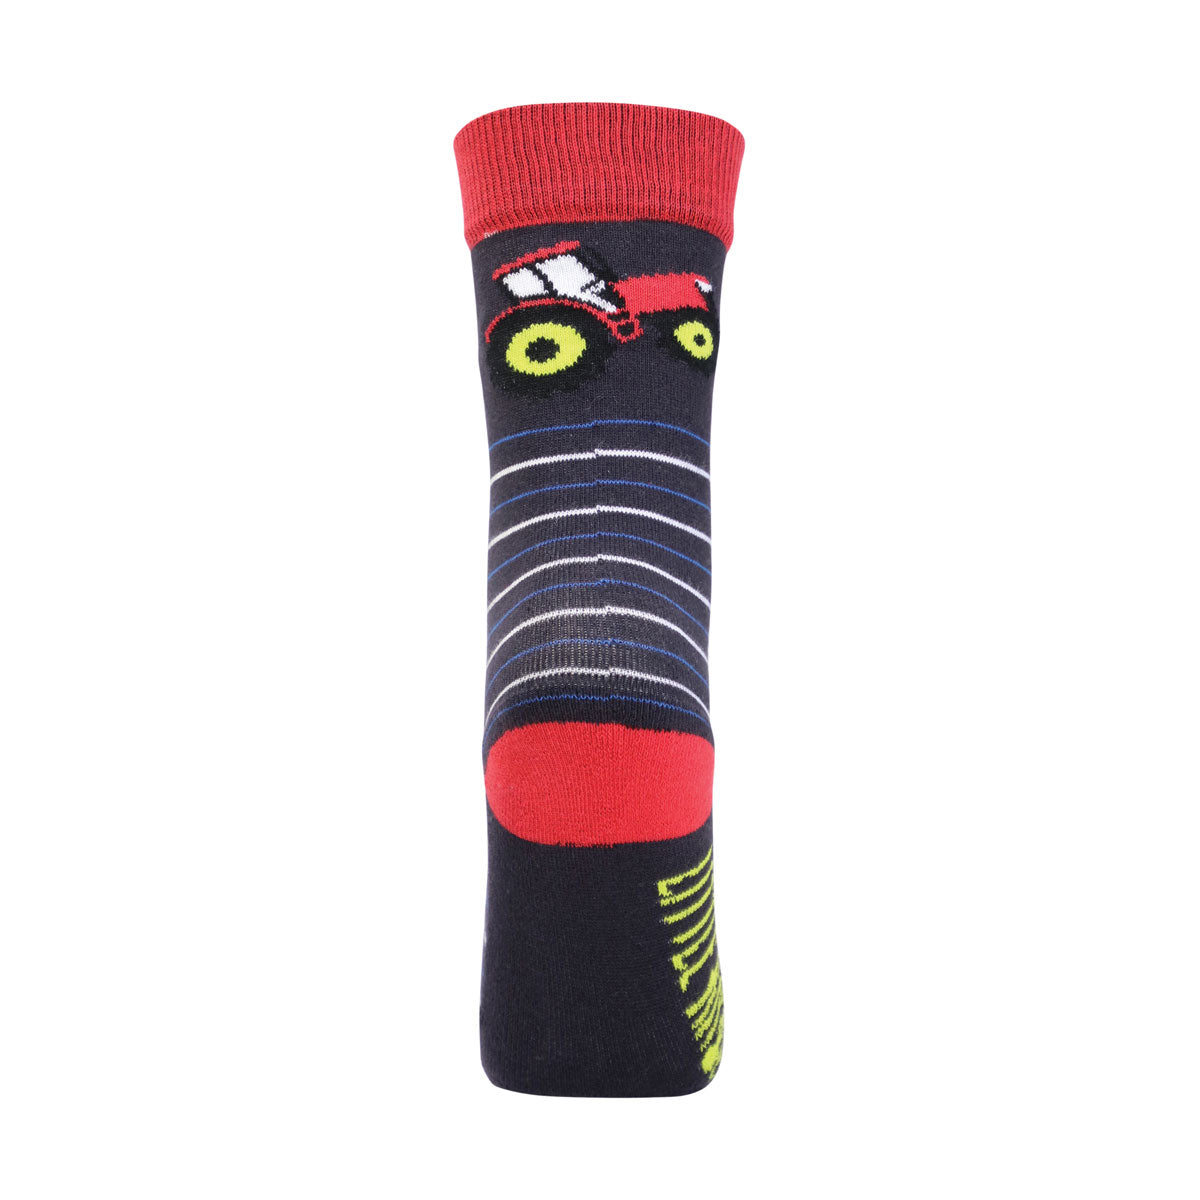 Tractor Collection Socks by Little Knight (Pack of 3)